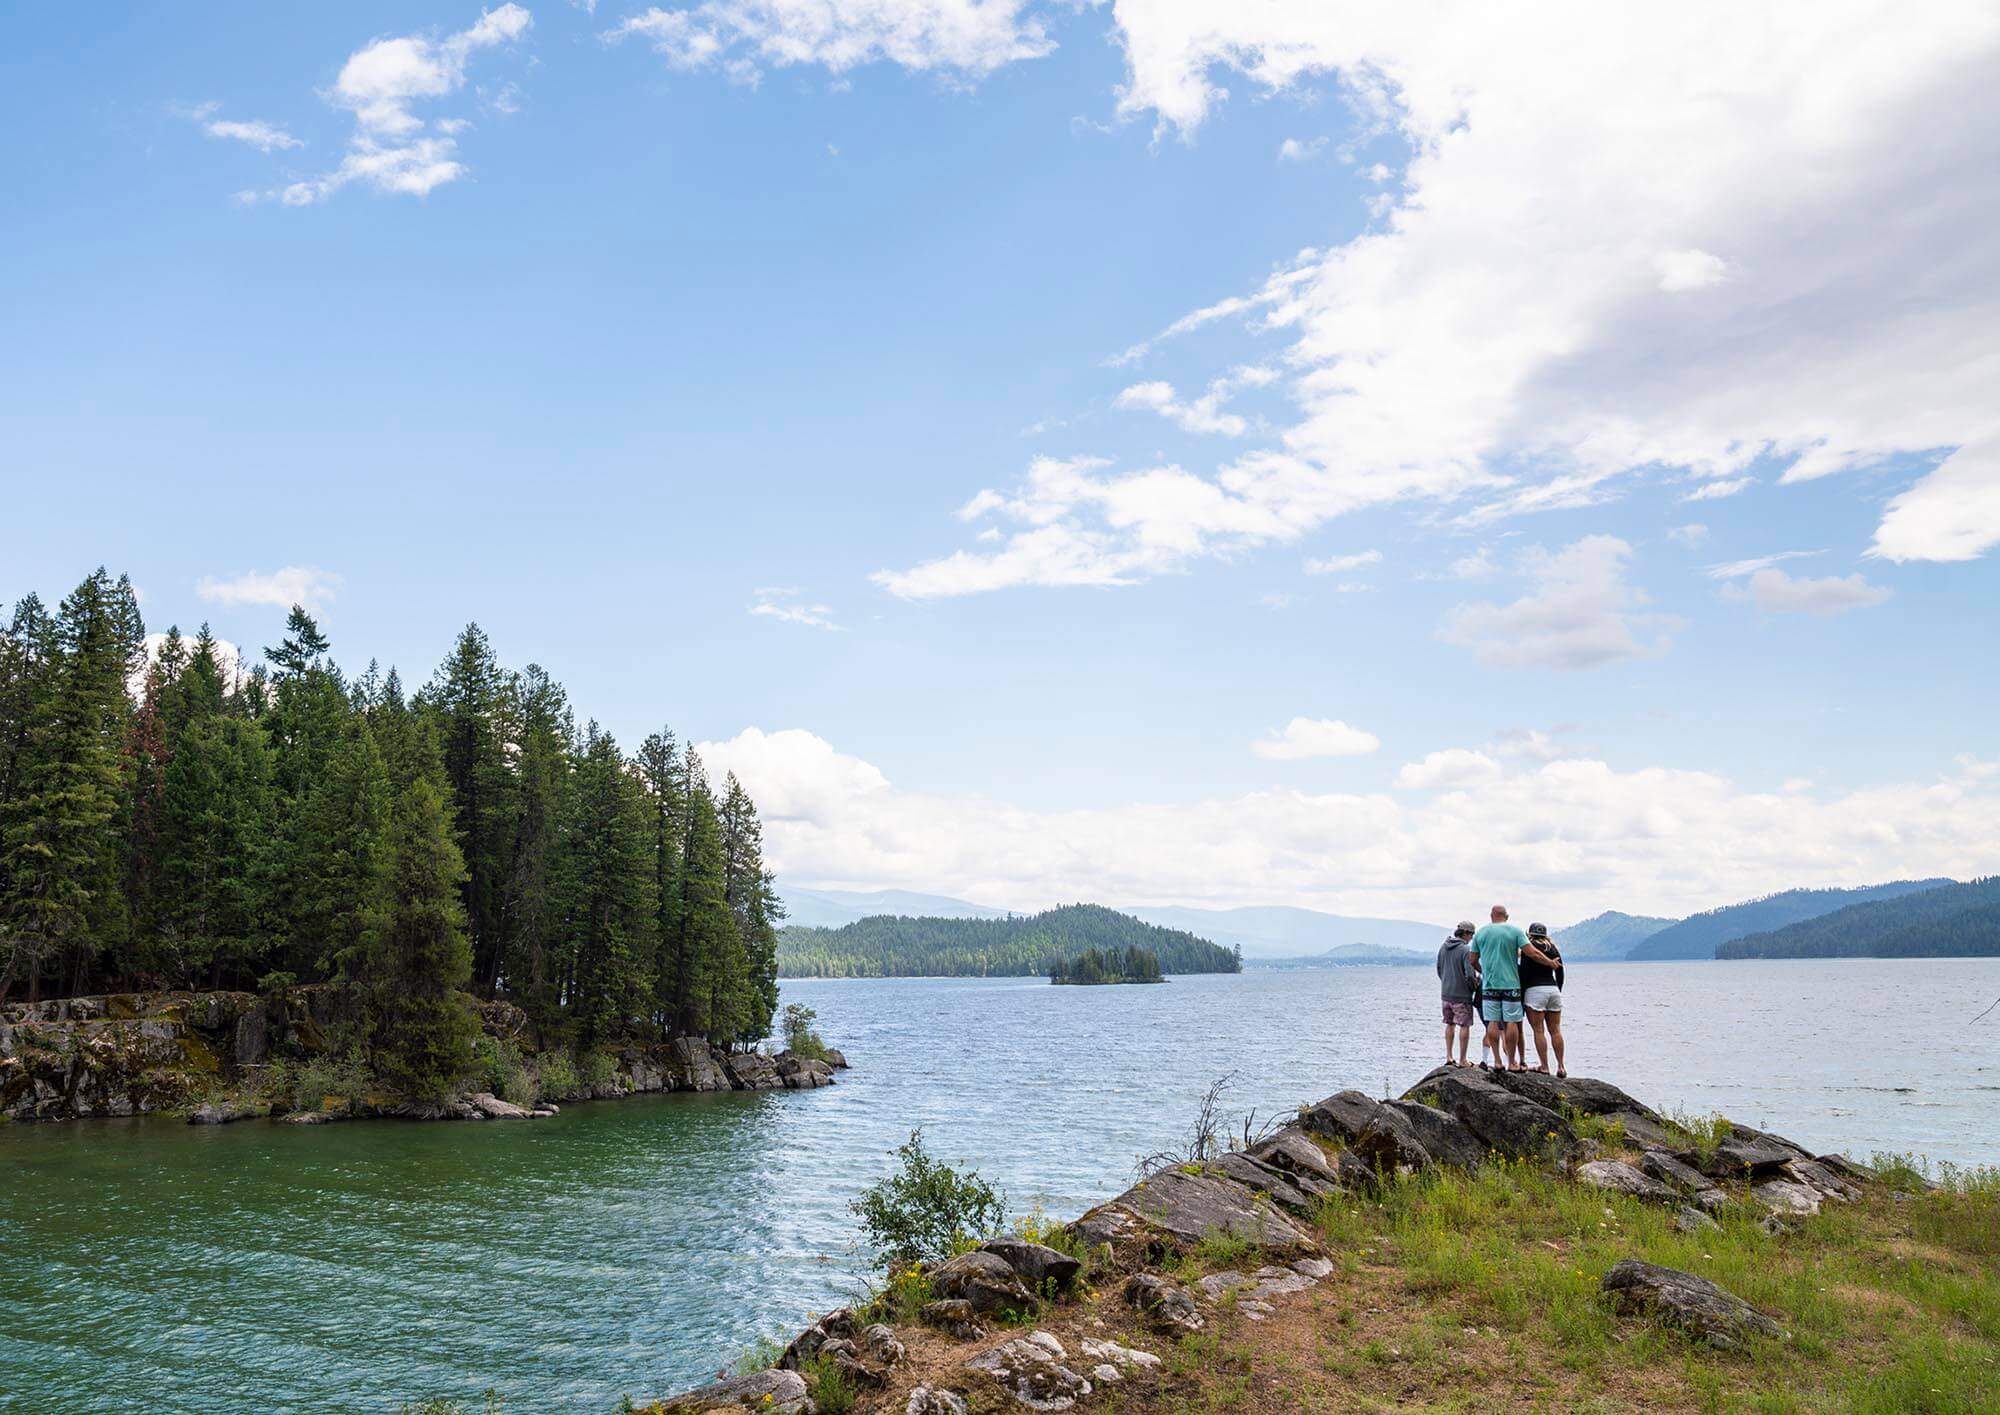 Four people stand in an embrace overlooking a scenic lake with small, forested islands.